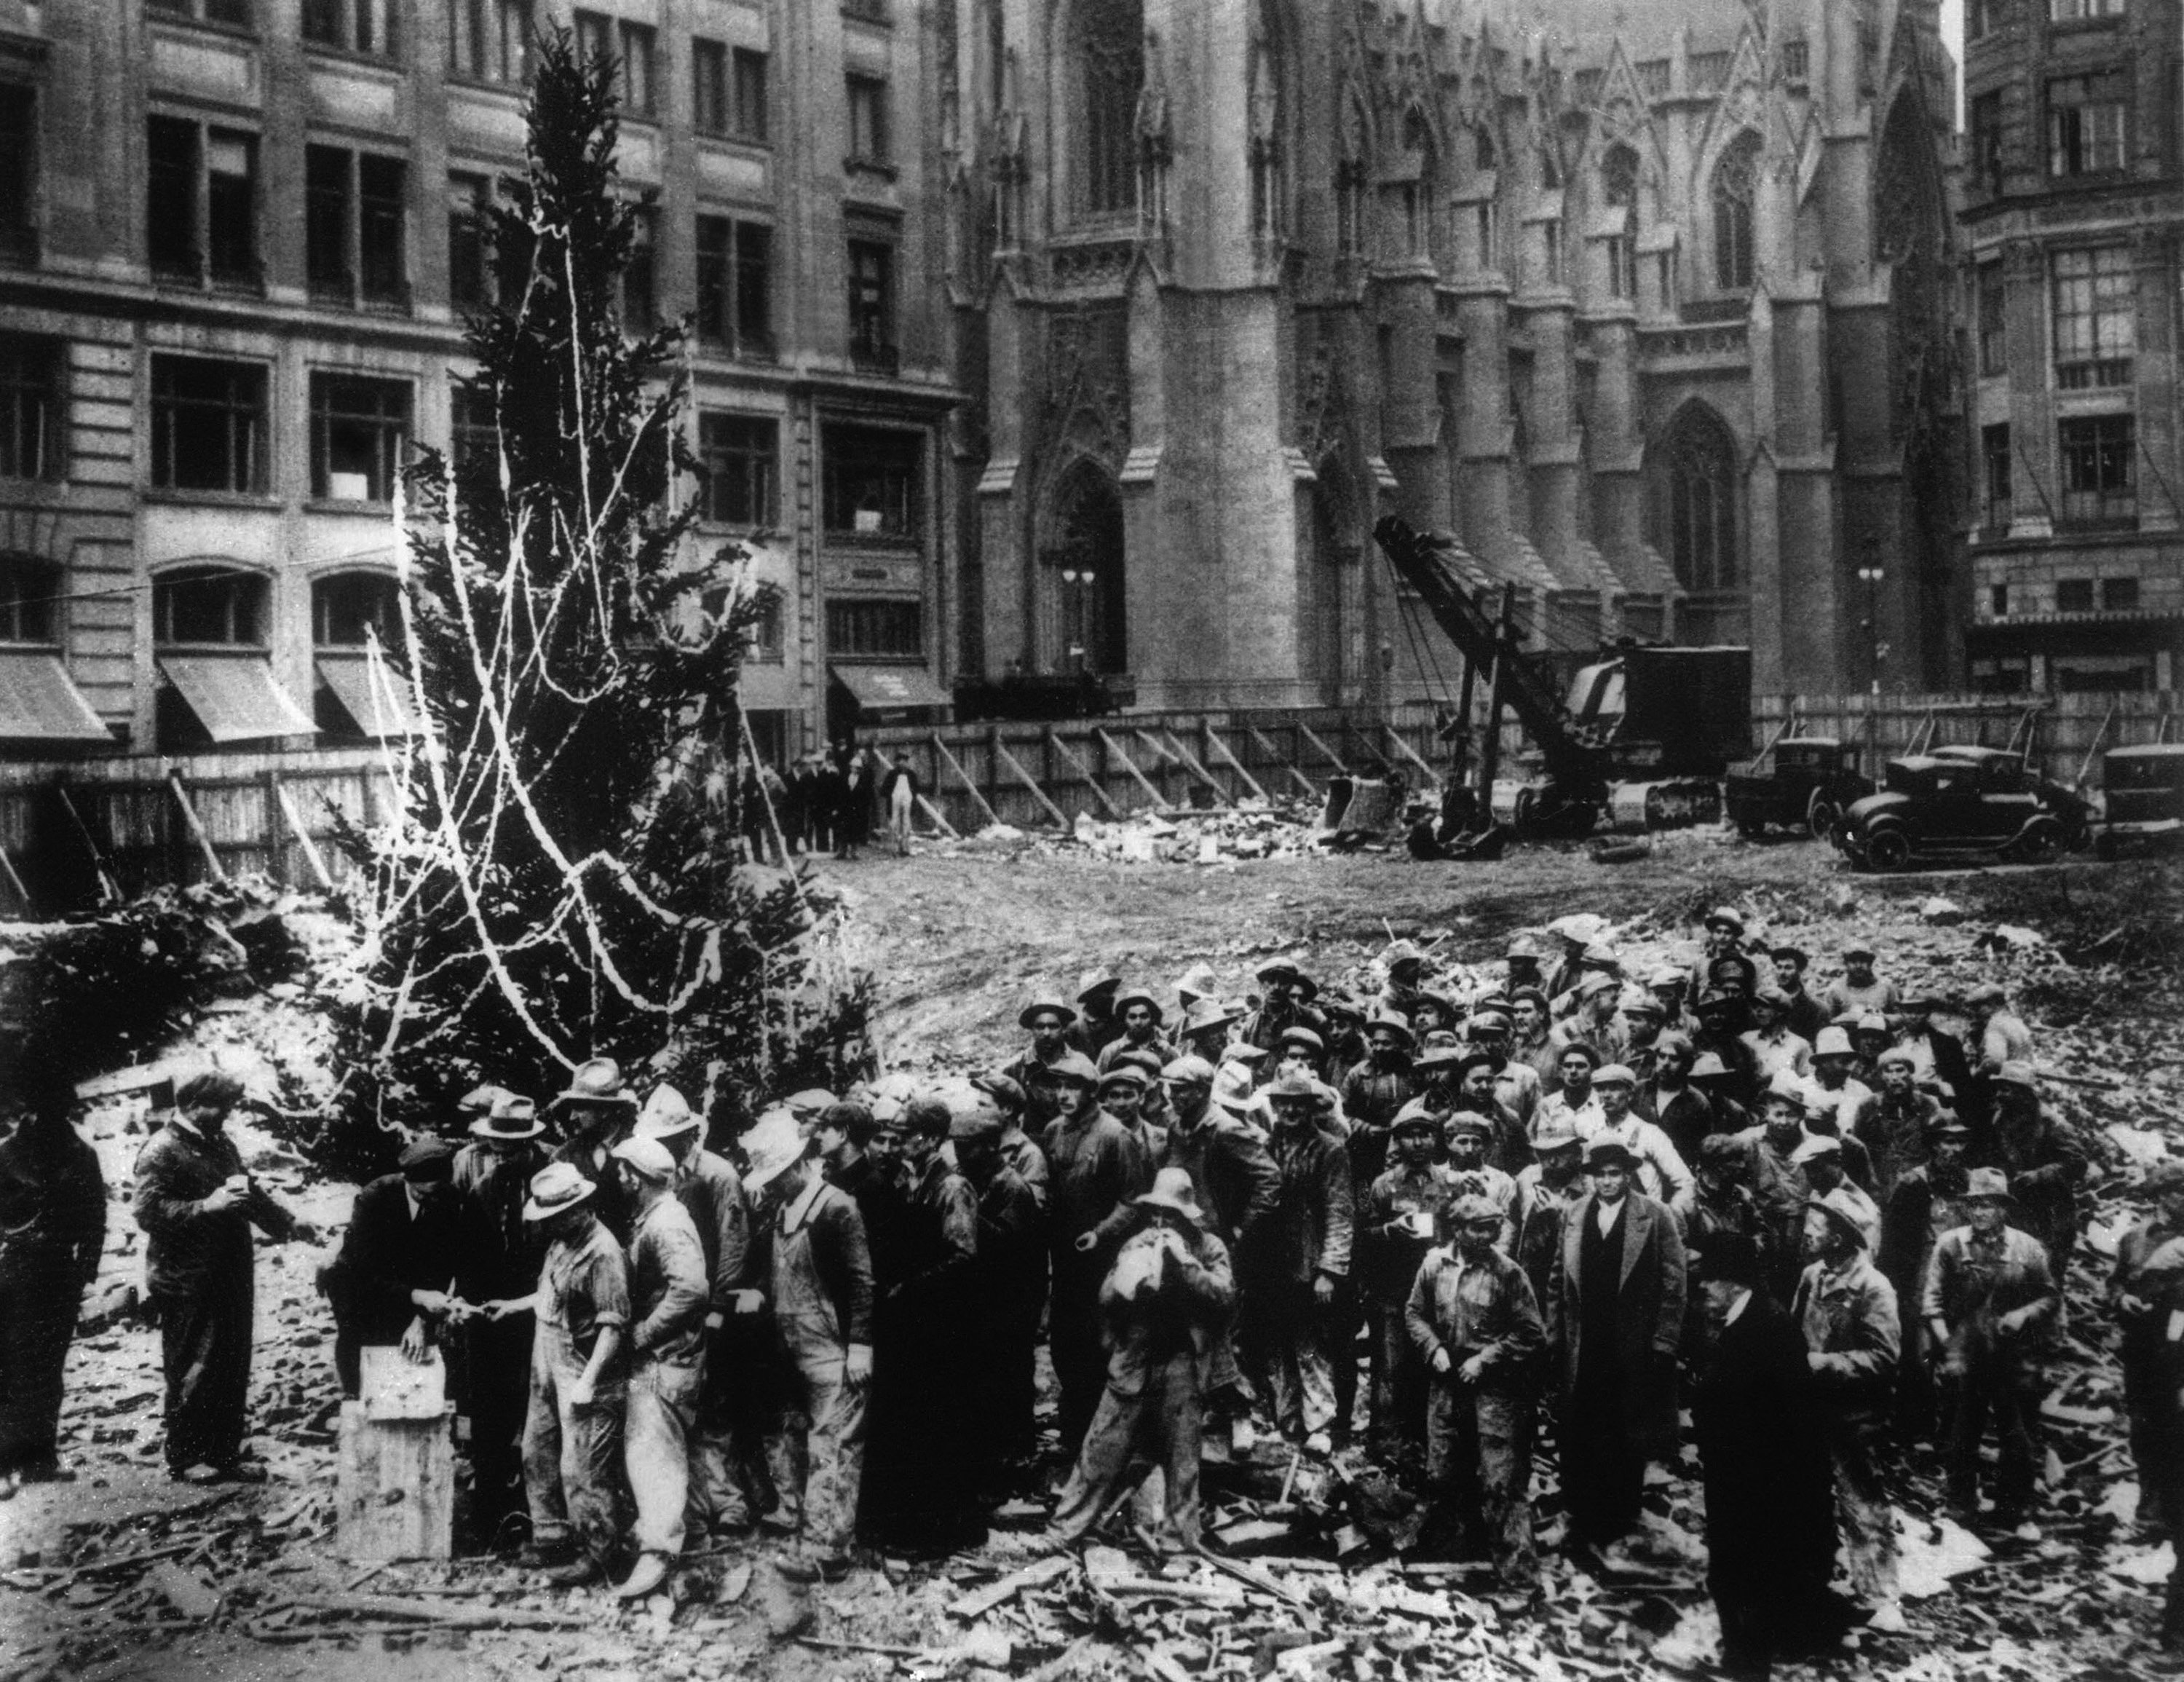 Construction workers line up for pay beside the first Rockefeller Center Christmas tree in New York in 1931. St. Patrick's Cathedral is visible in the background on Fifth Avenue. (AP Photo)